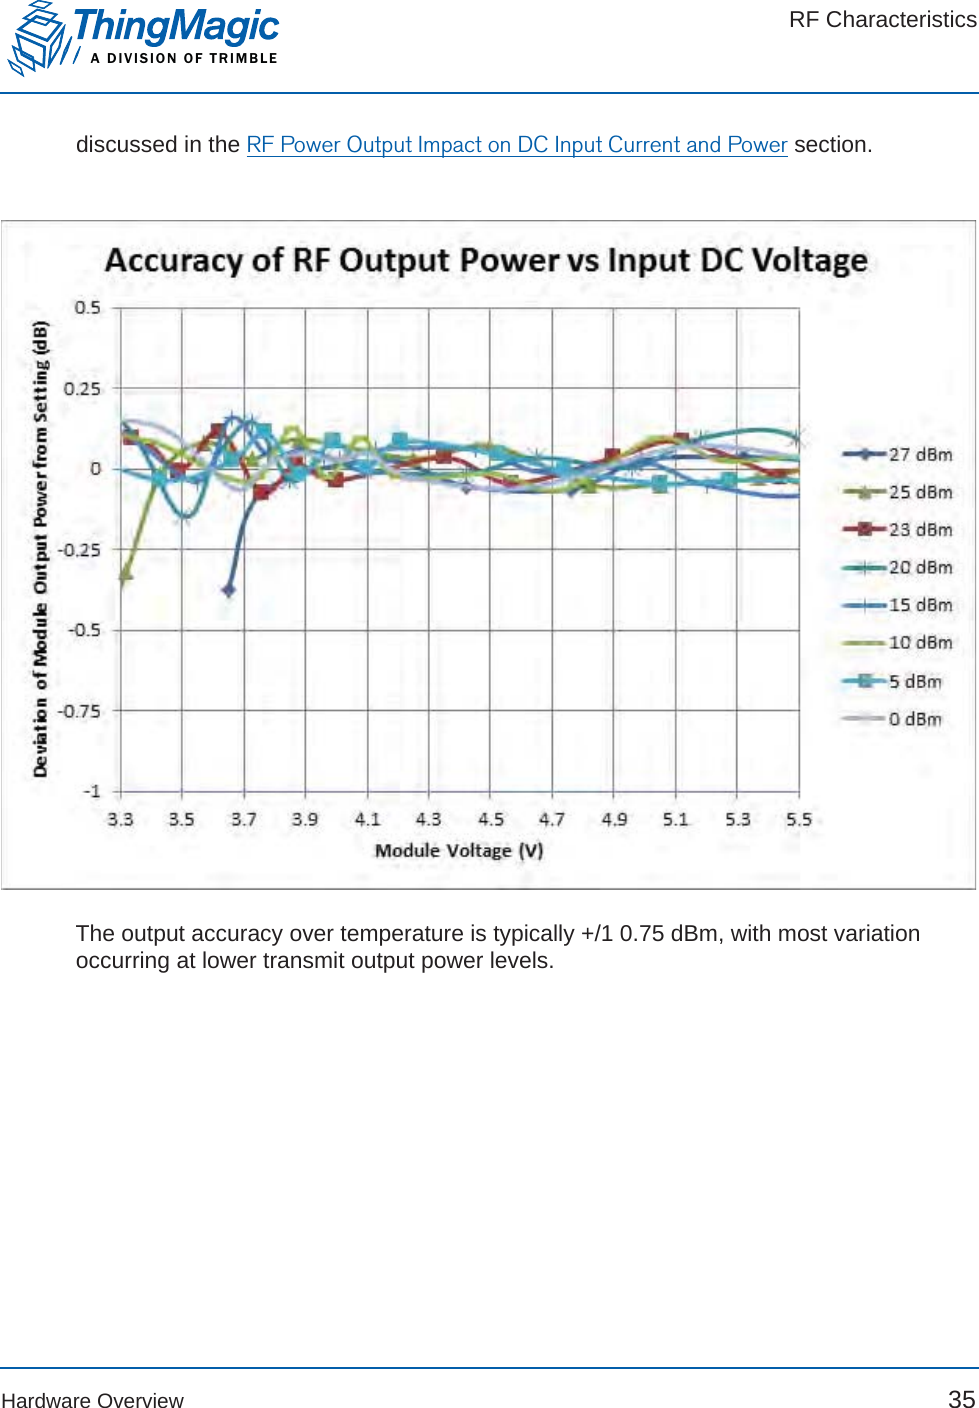 RF CharacteristicsA DIVISION OF TRIMBLEHardware Overview 35discussed in the RF Power Output Impact on DC Input Current and Power section.The output accuracy over temperature is typically +/1 0.75 dBm, with most variation occurring at lower transmit output power levels.